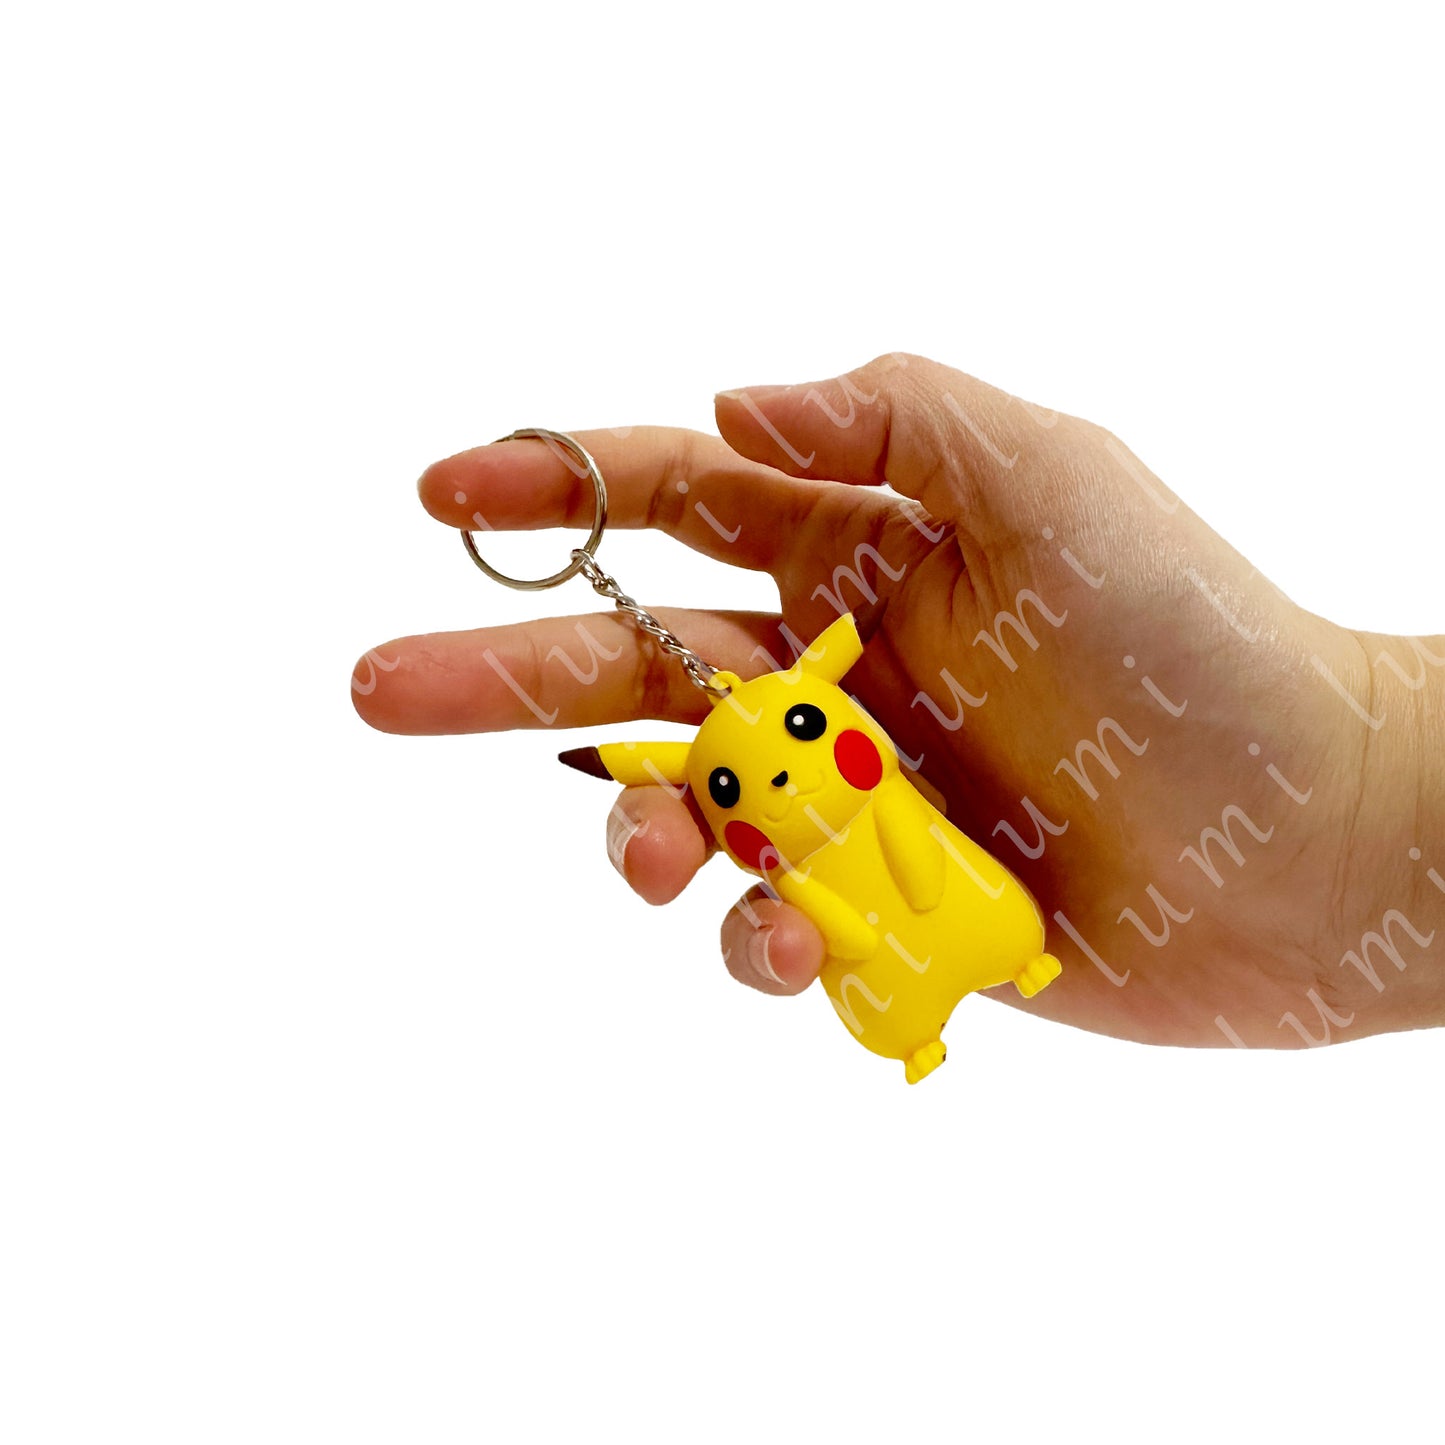 Image of a cute Pikachu Keychain, a perfect Pokémon-inspired accessory for your keys.